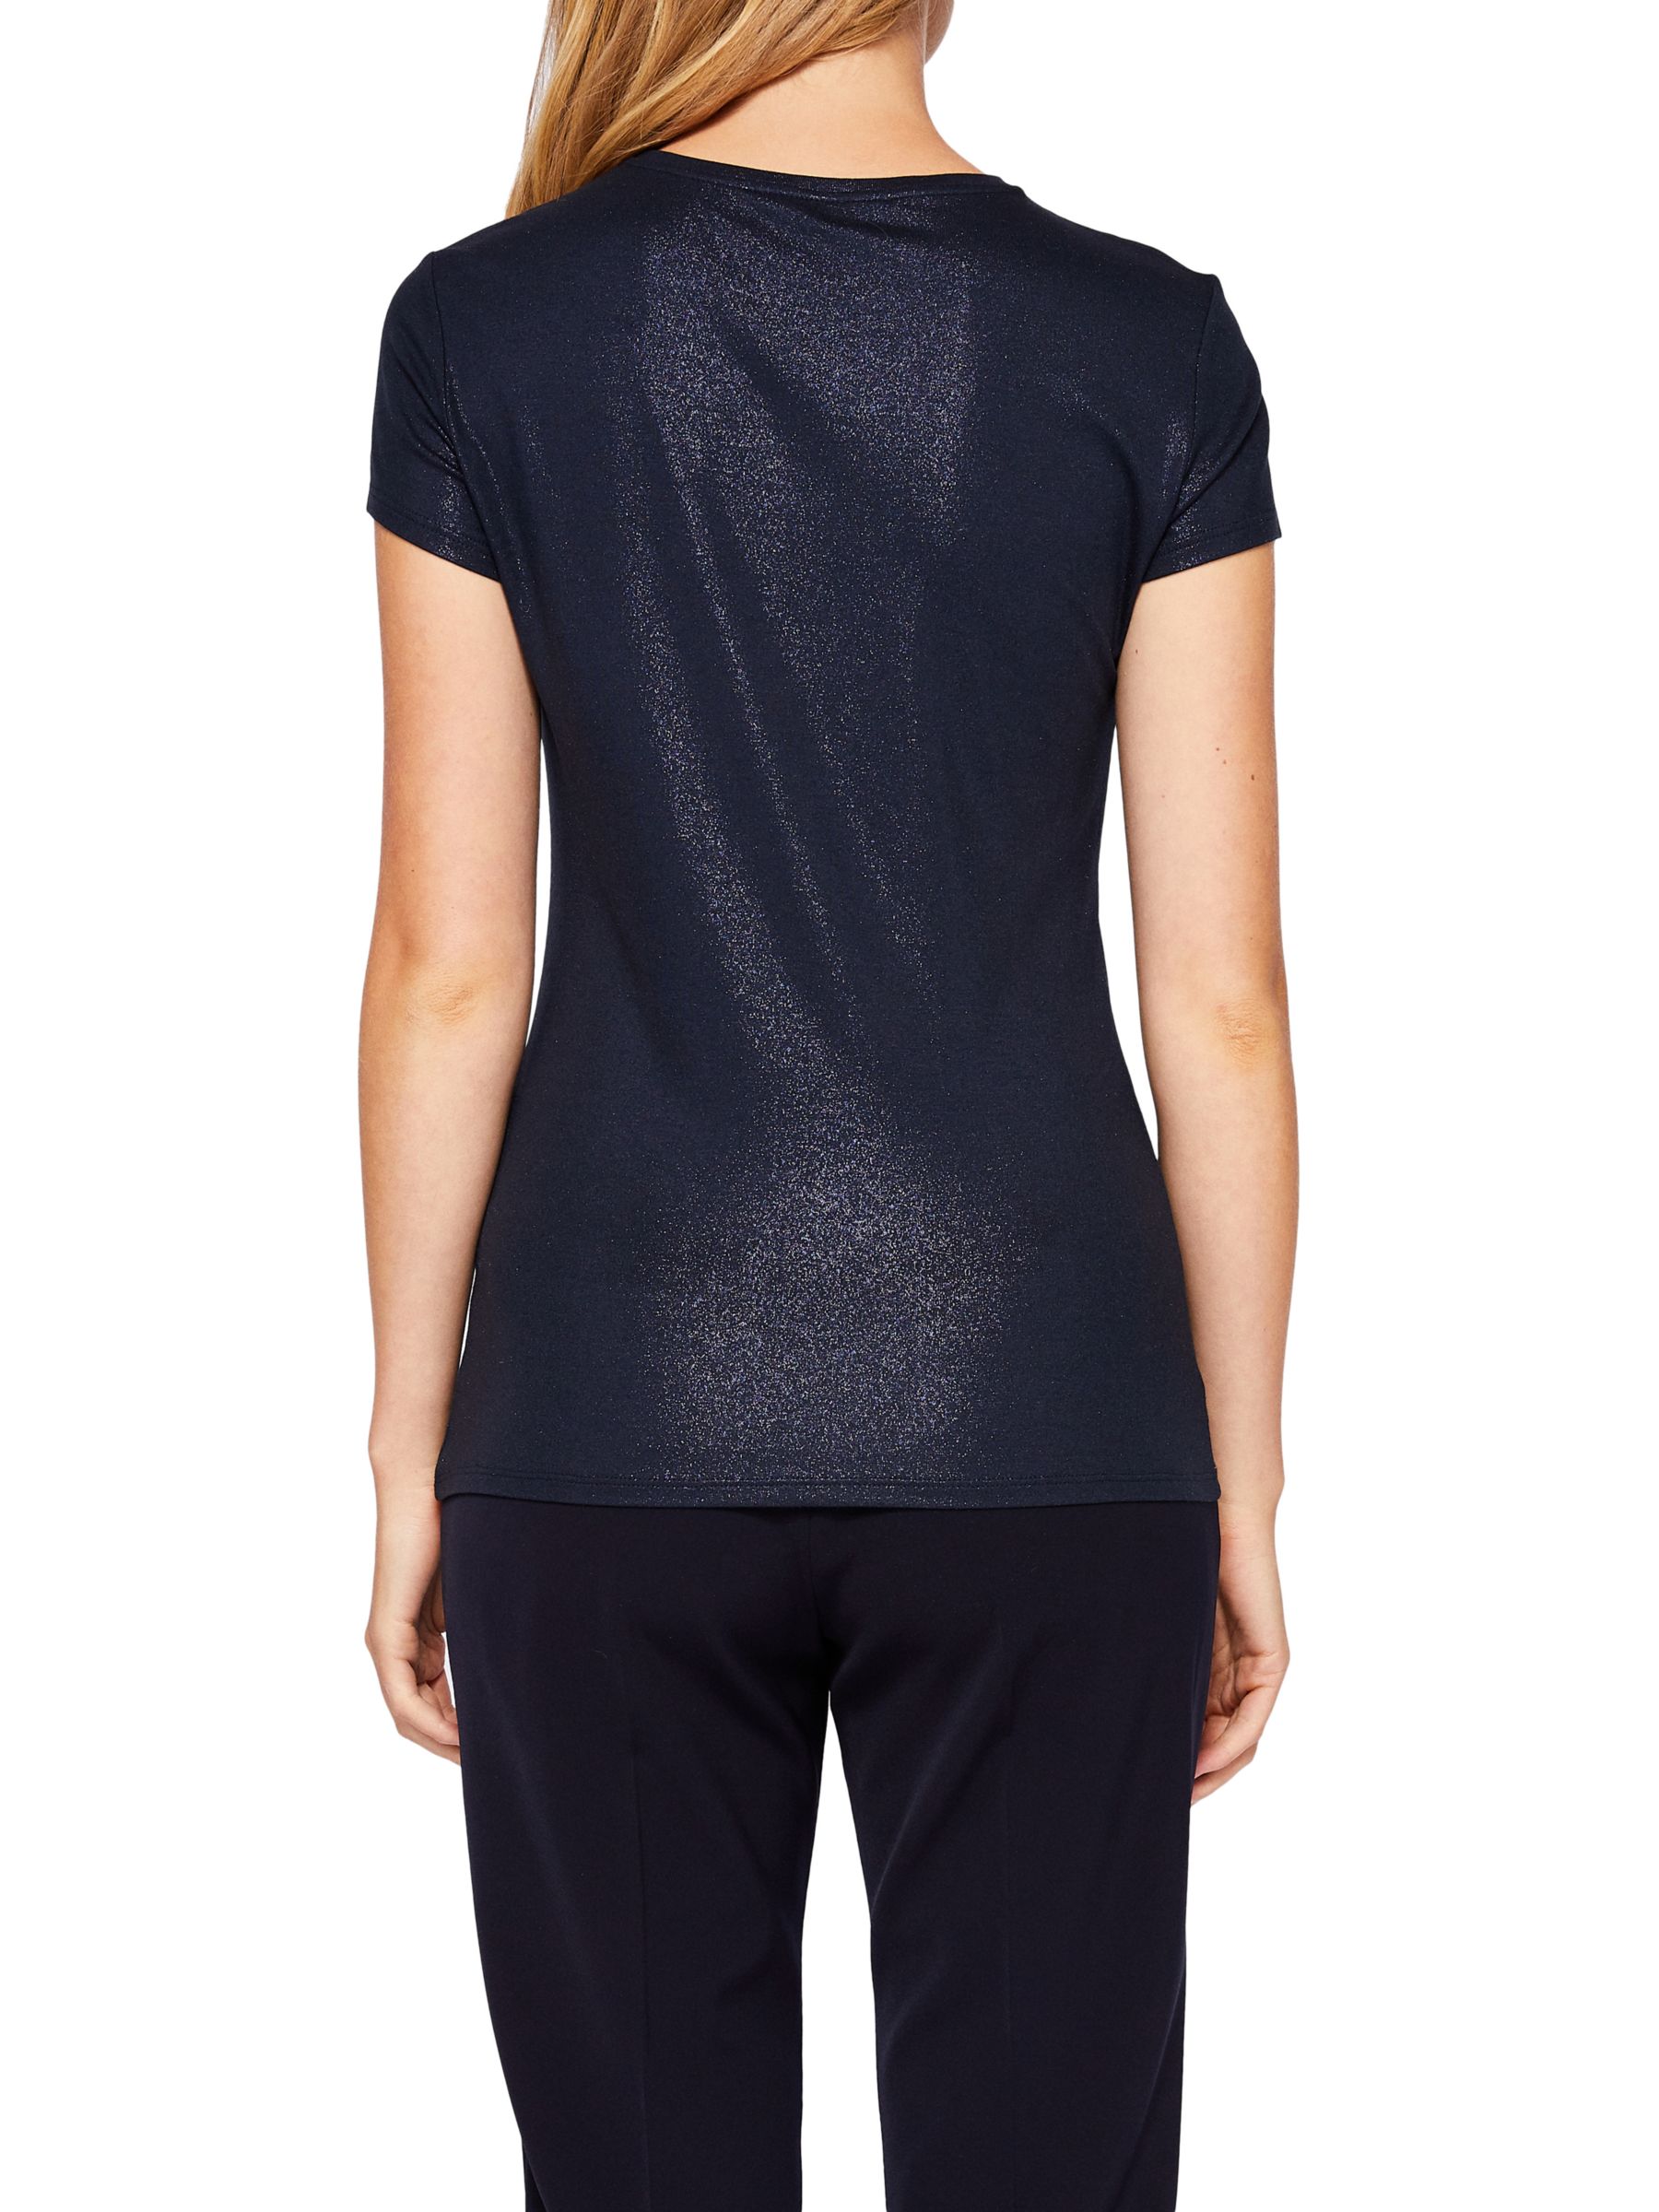 Ted Baker Sparkle Fitted T-Shirt, Navy at John Lewis & Partners